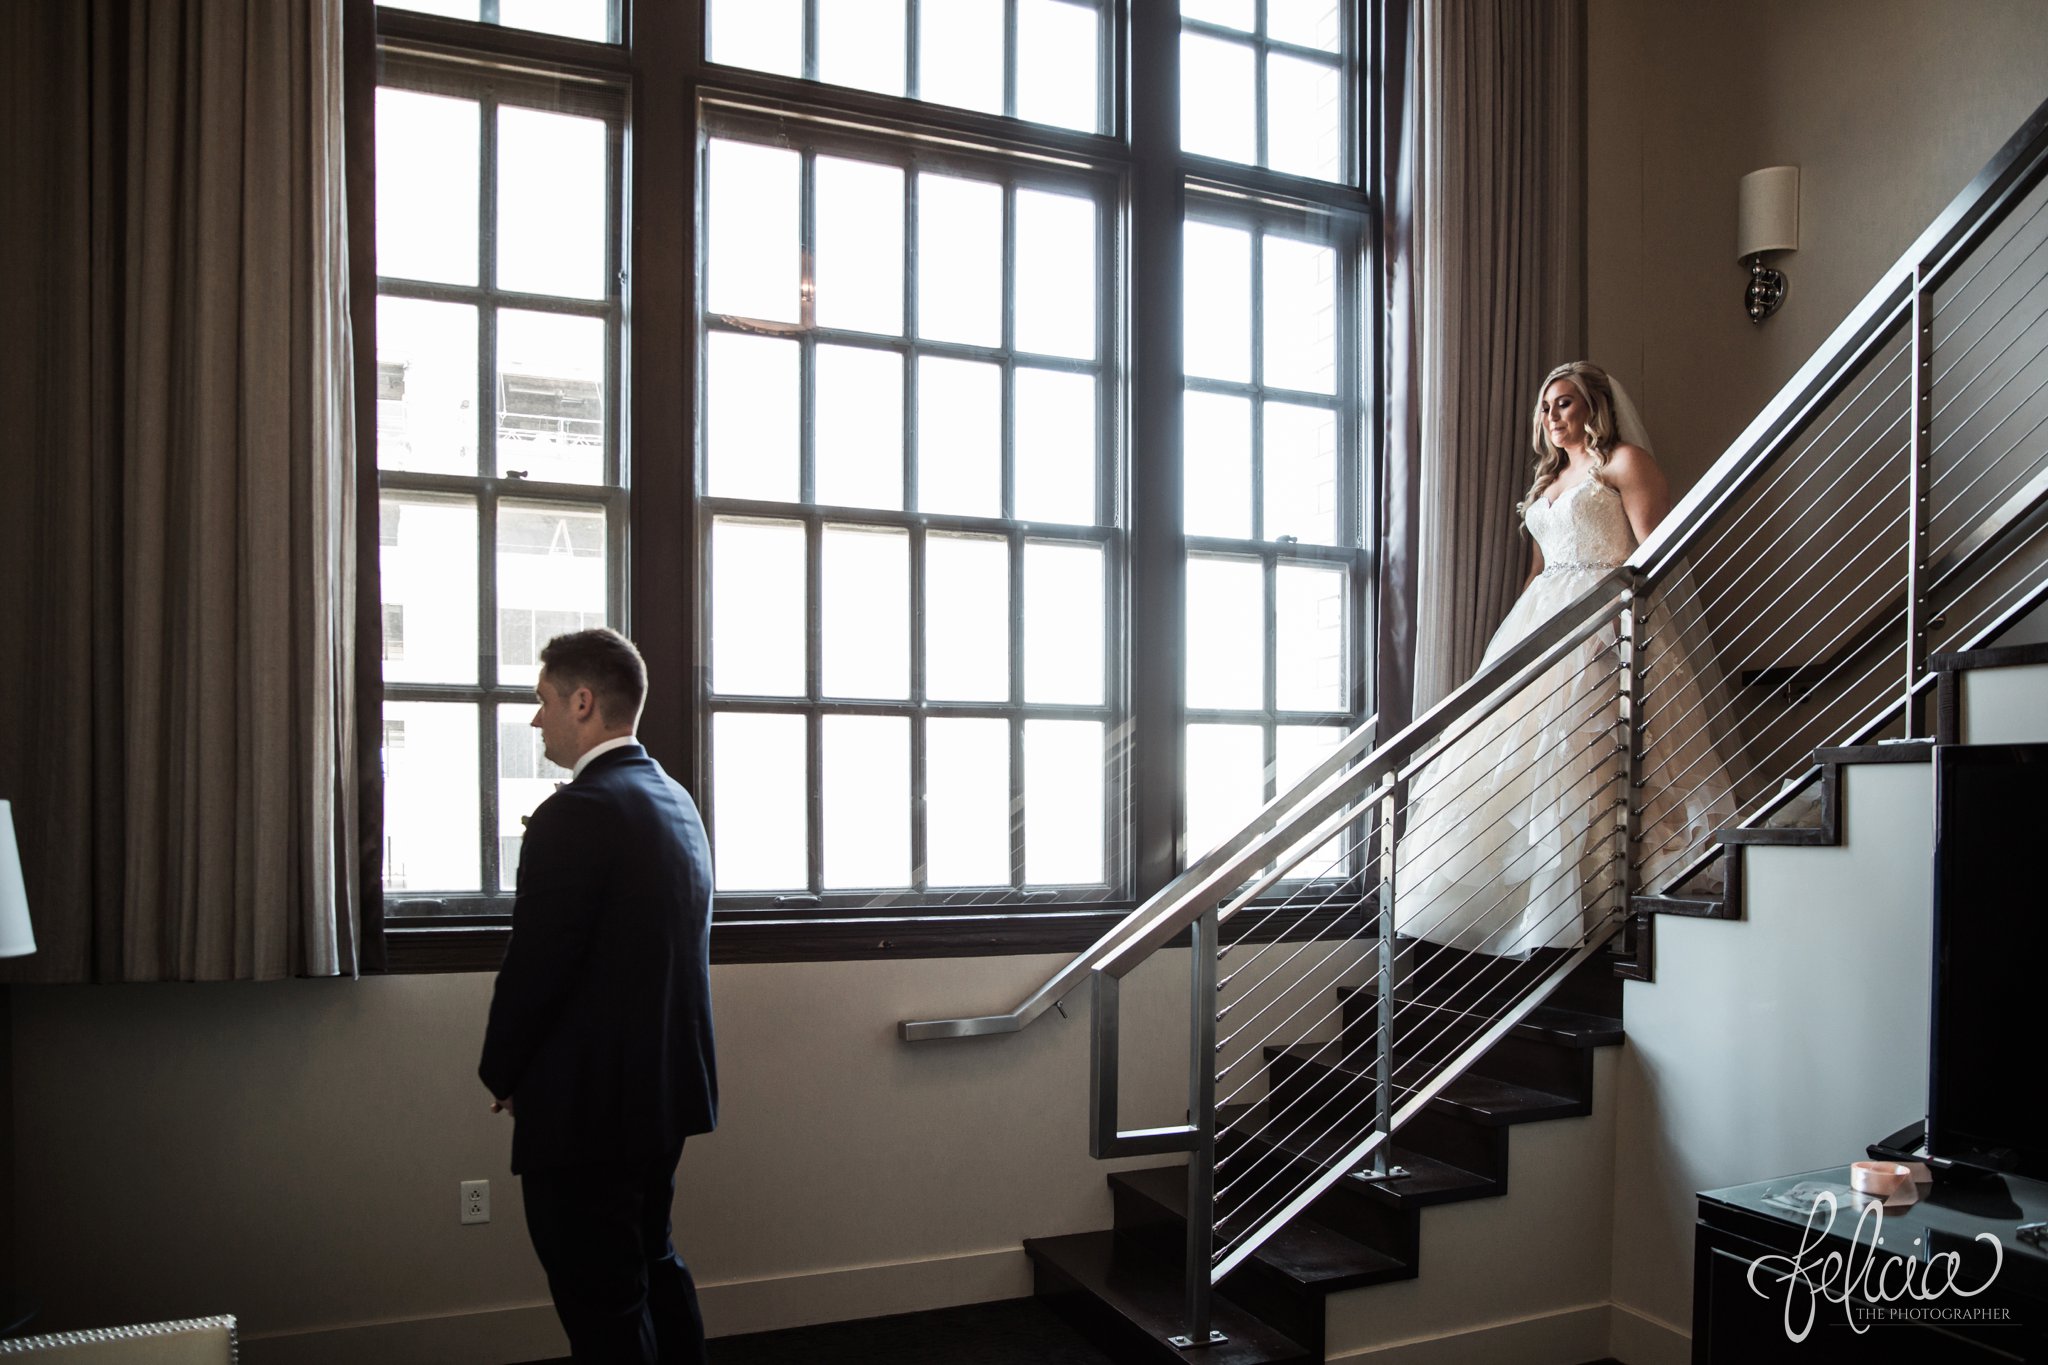 images by feliciathephotographer.com | wedding photographer | downtown kansas city | pre-ceremony | first look | staircase | romantic | waiting groom | natural light | 